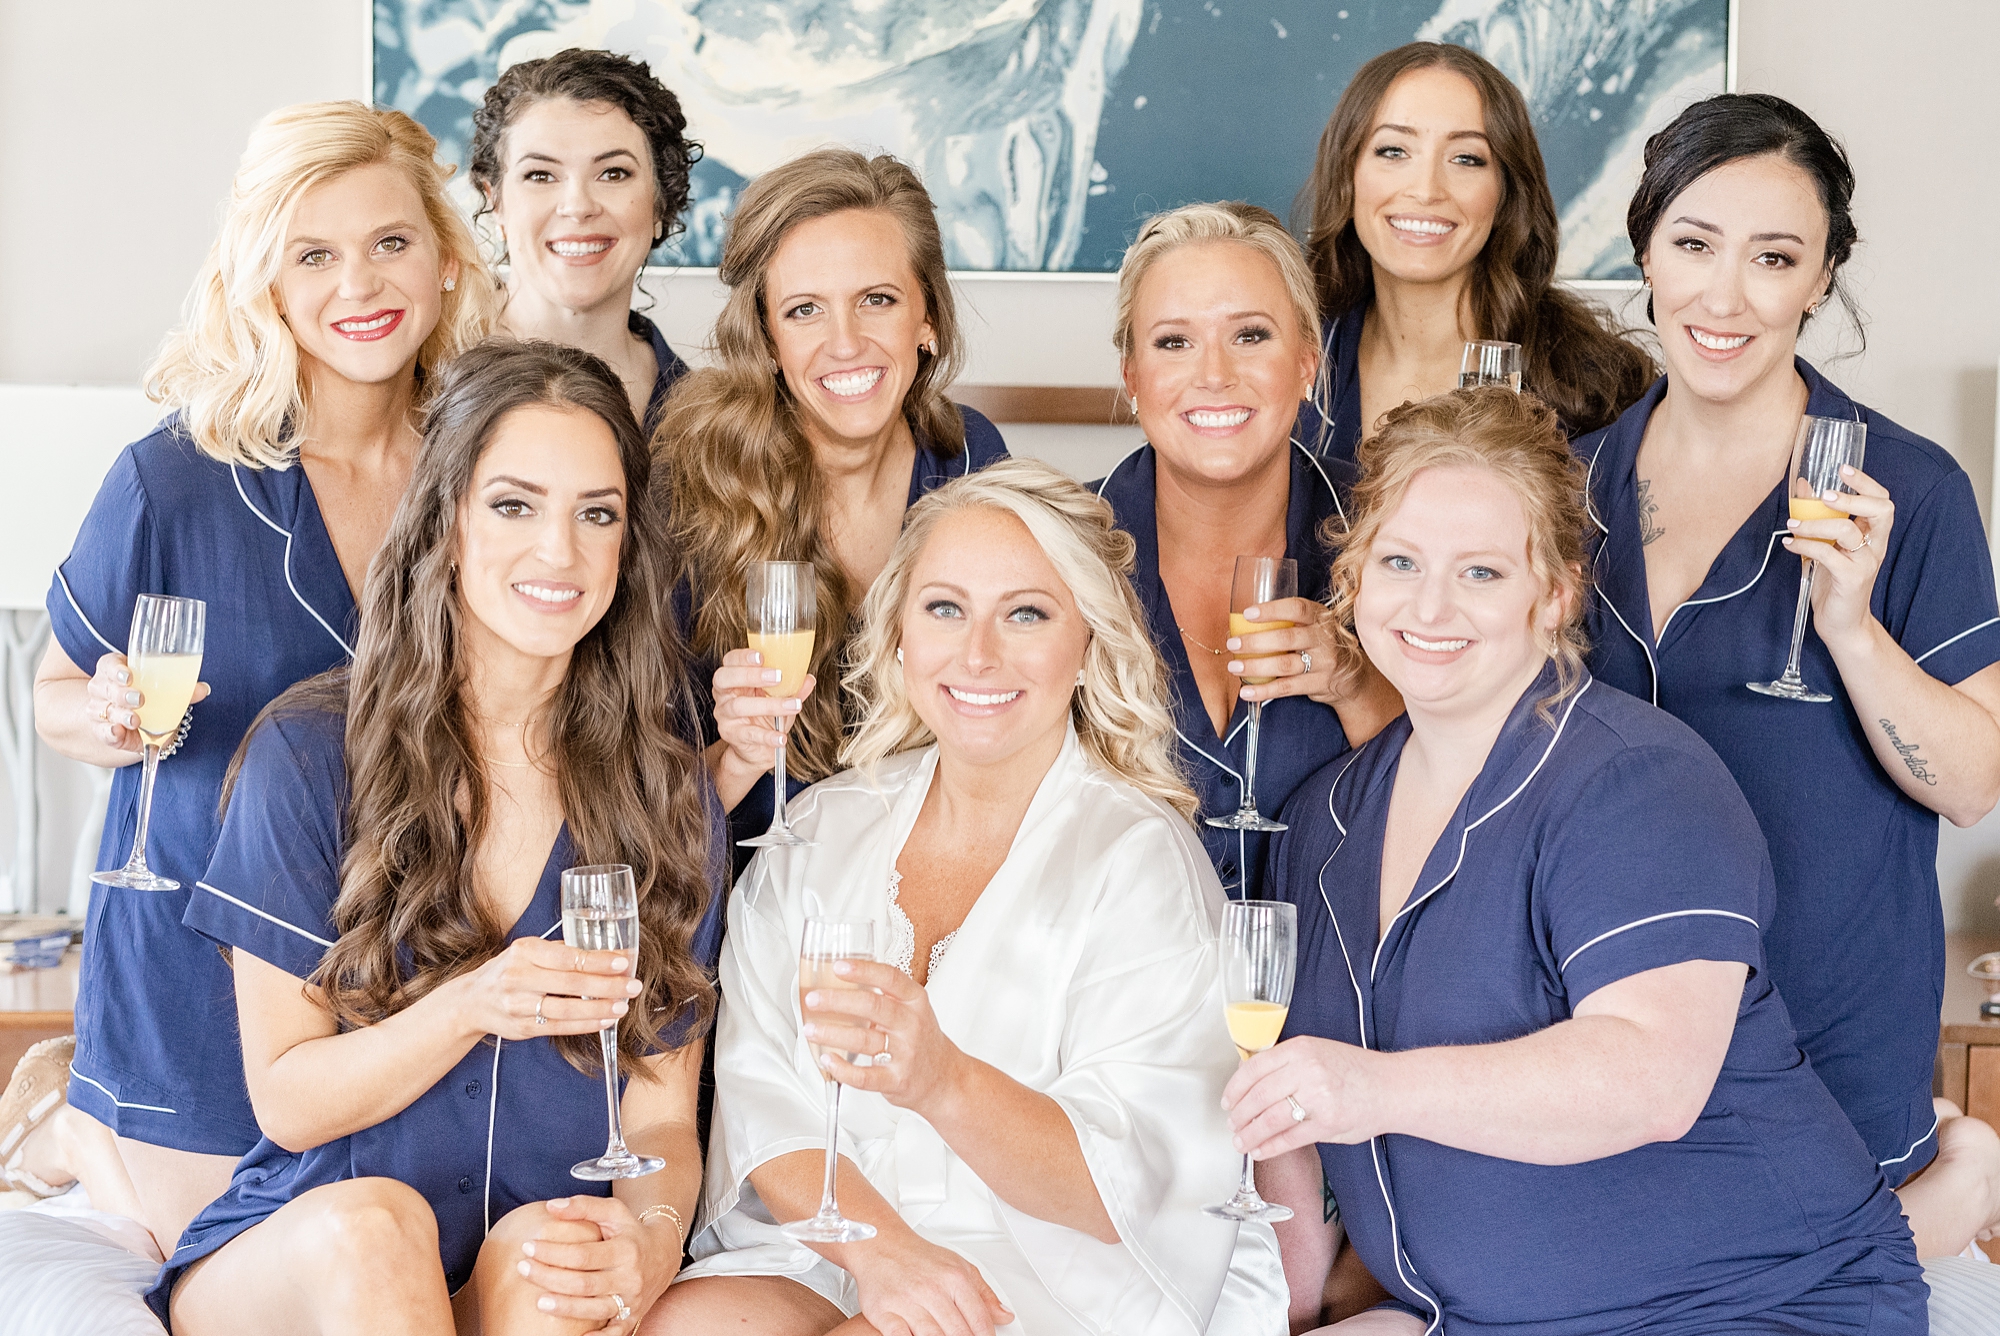 bride poses with bridesmaids in matching blue pajamas